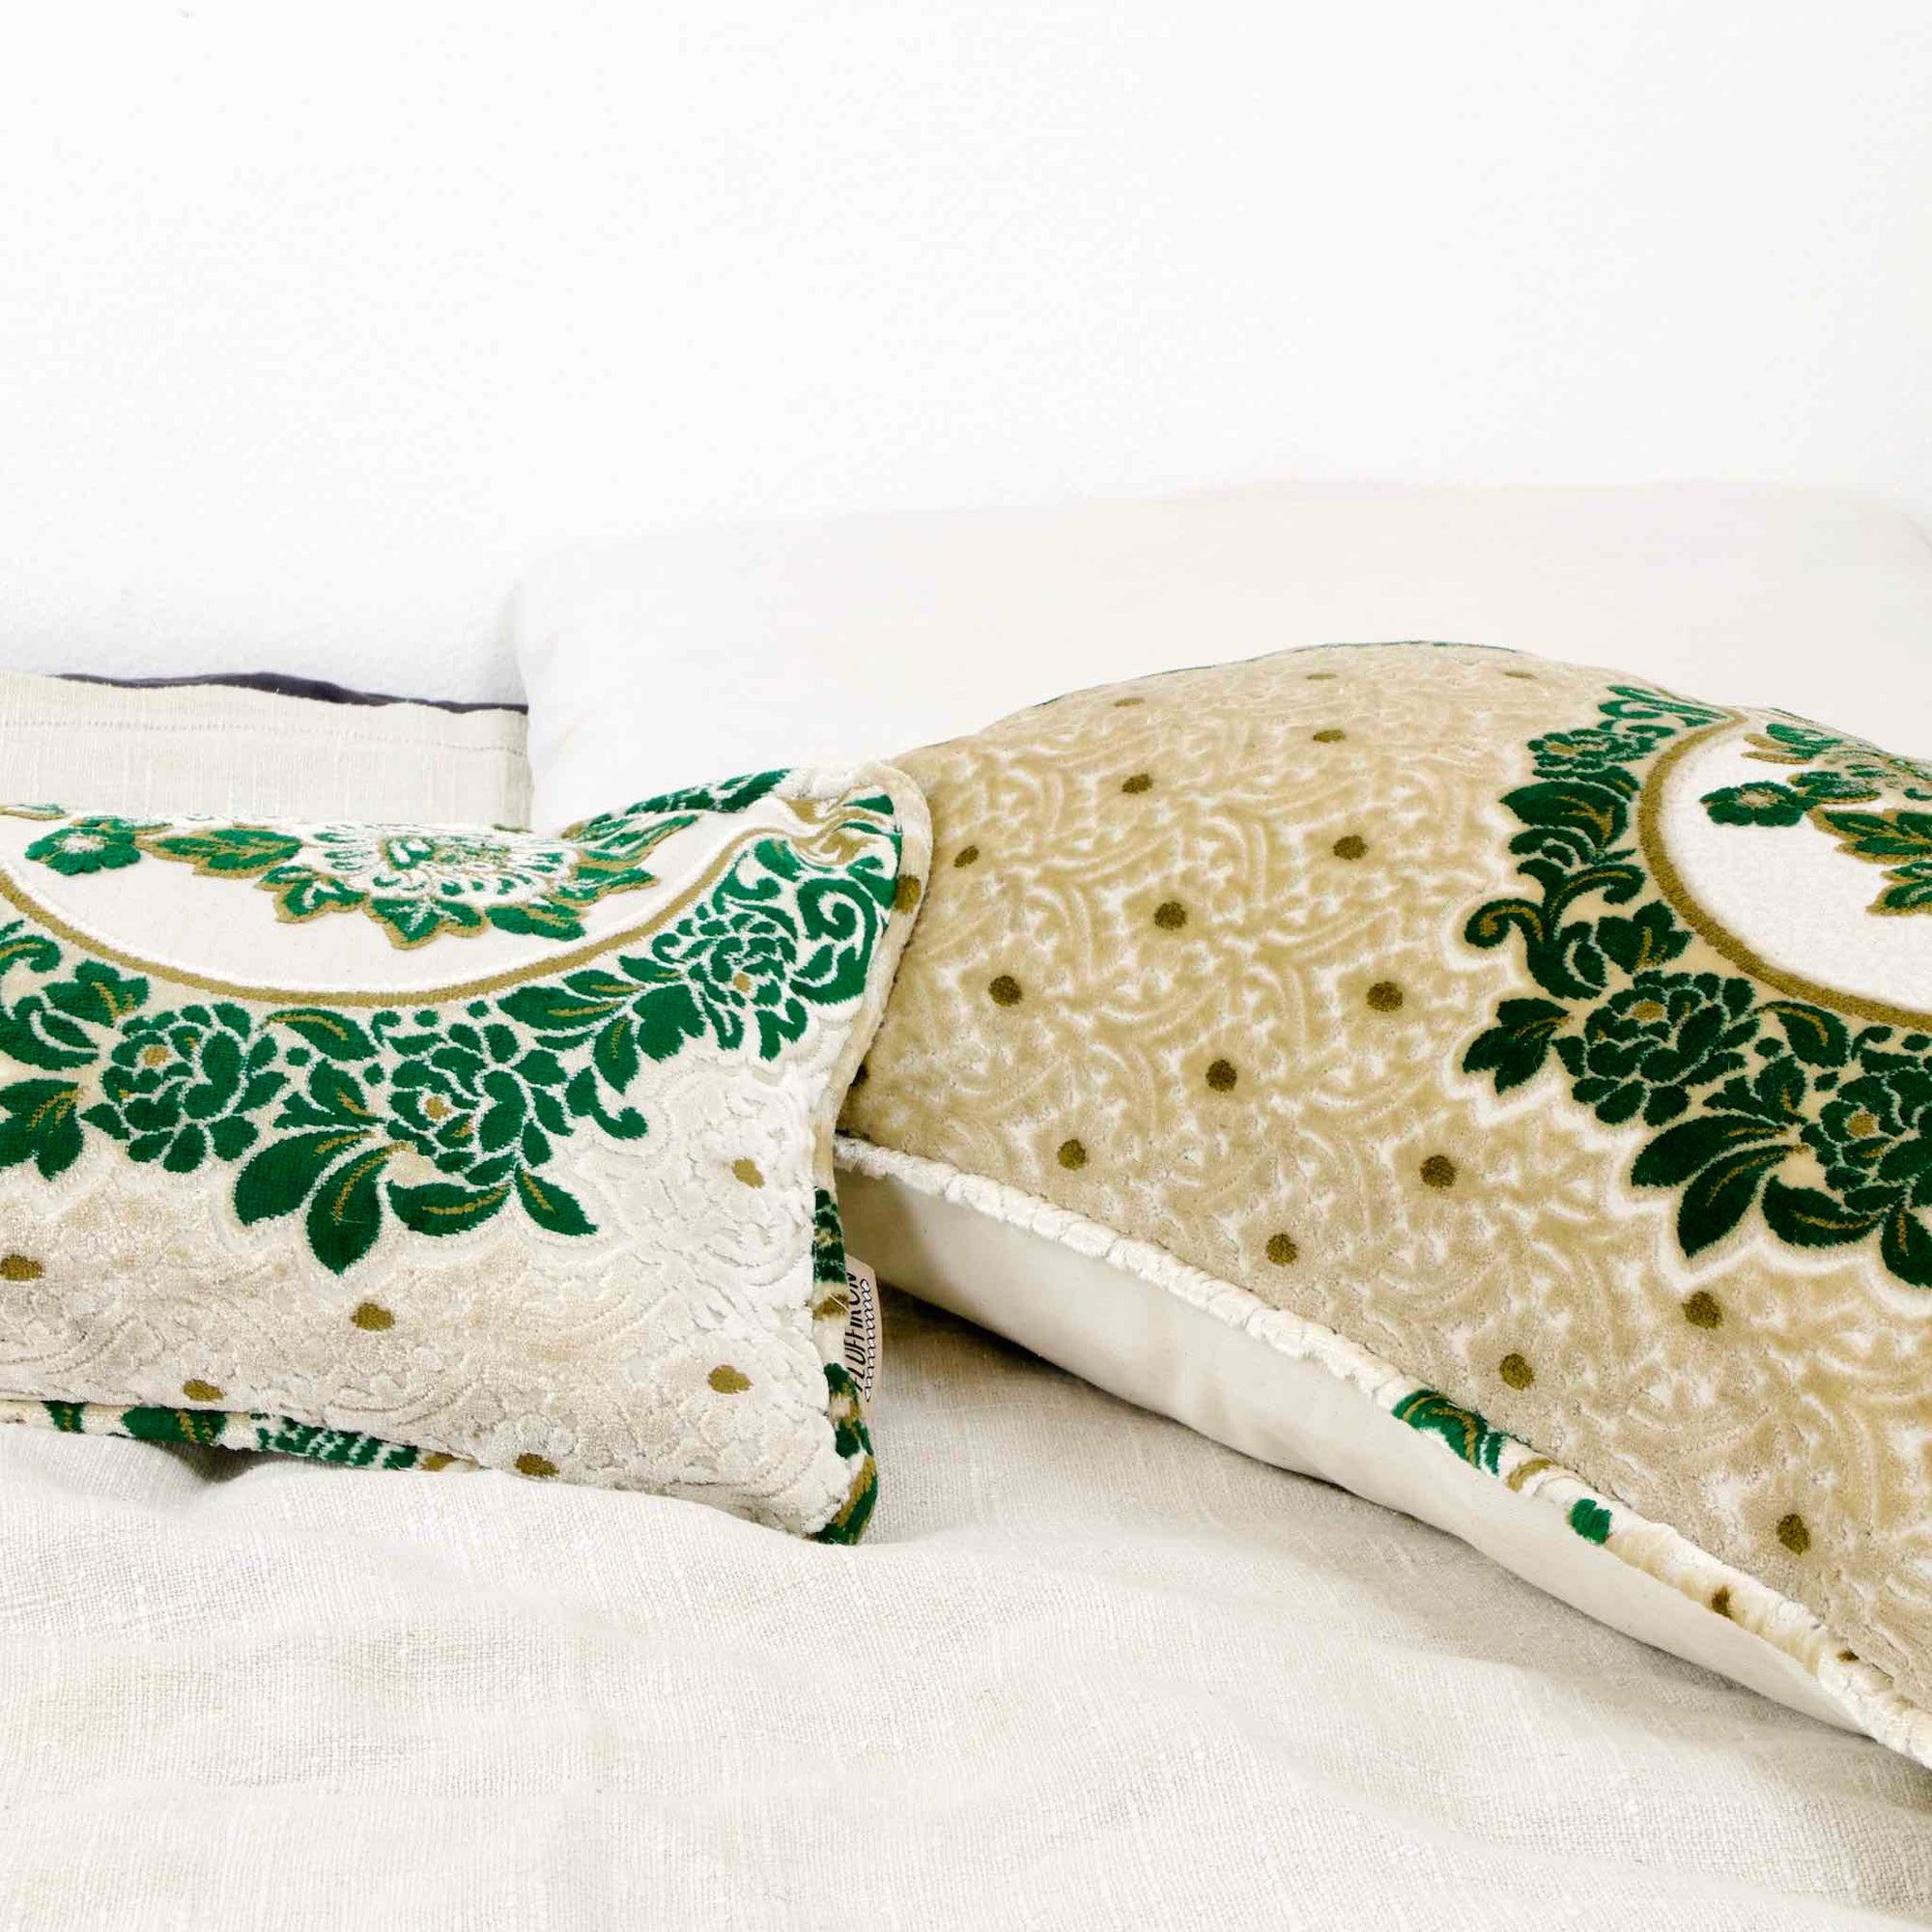 One lumbar pillow and one XXL throw pillow on a bed. The pillows have traditional moroccan patterm.